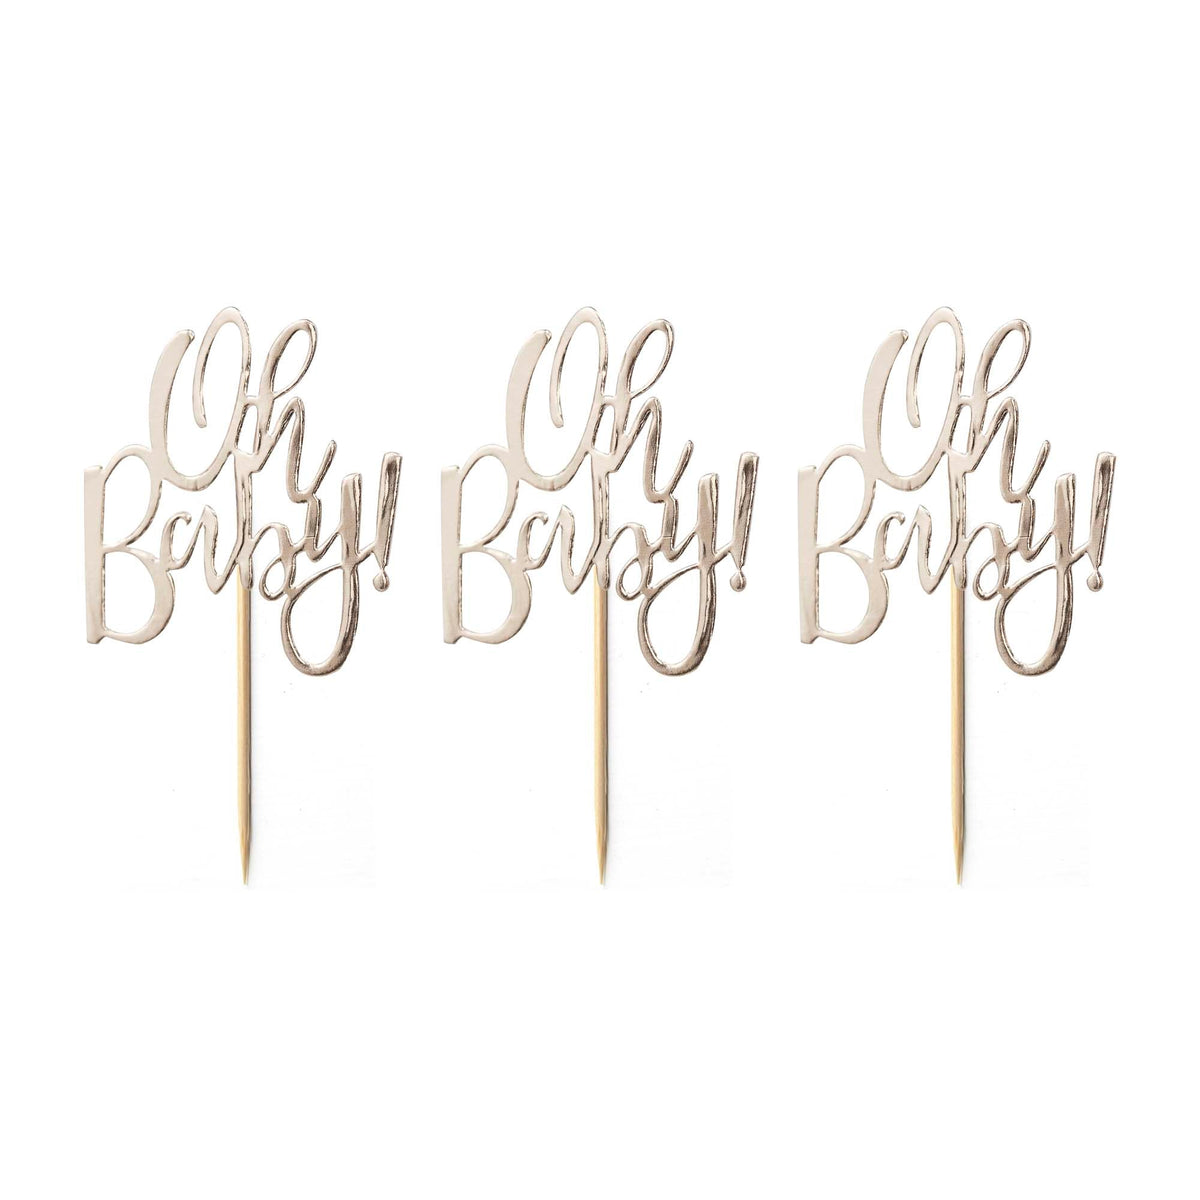 AMSCAN CA Baby Shower Oh Baby Cupcake Toppers, 12 Count 5056567035608